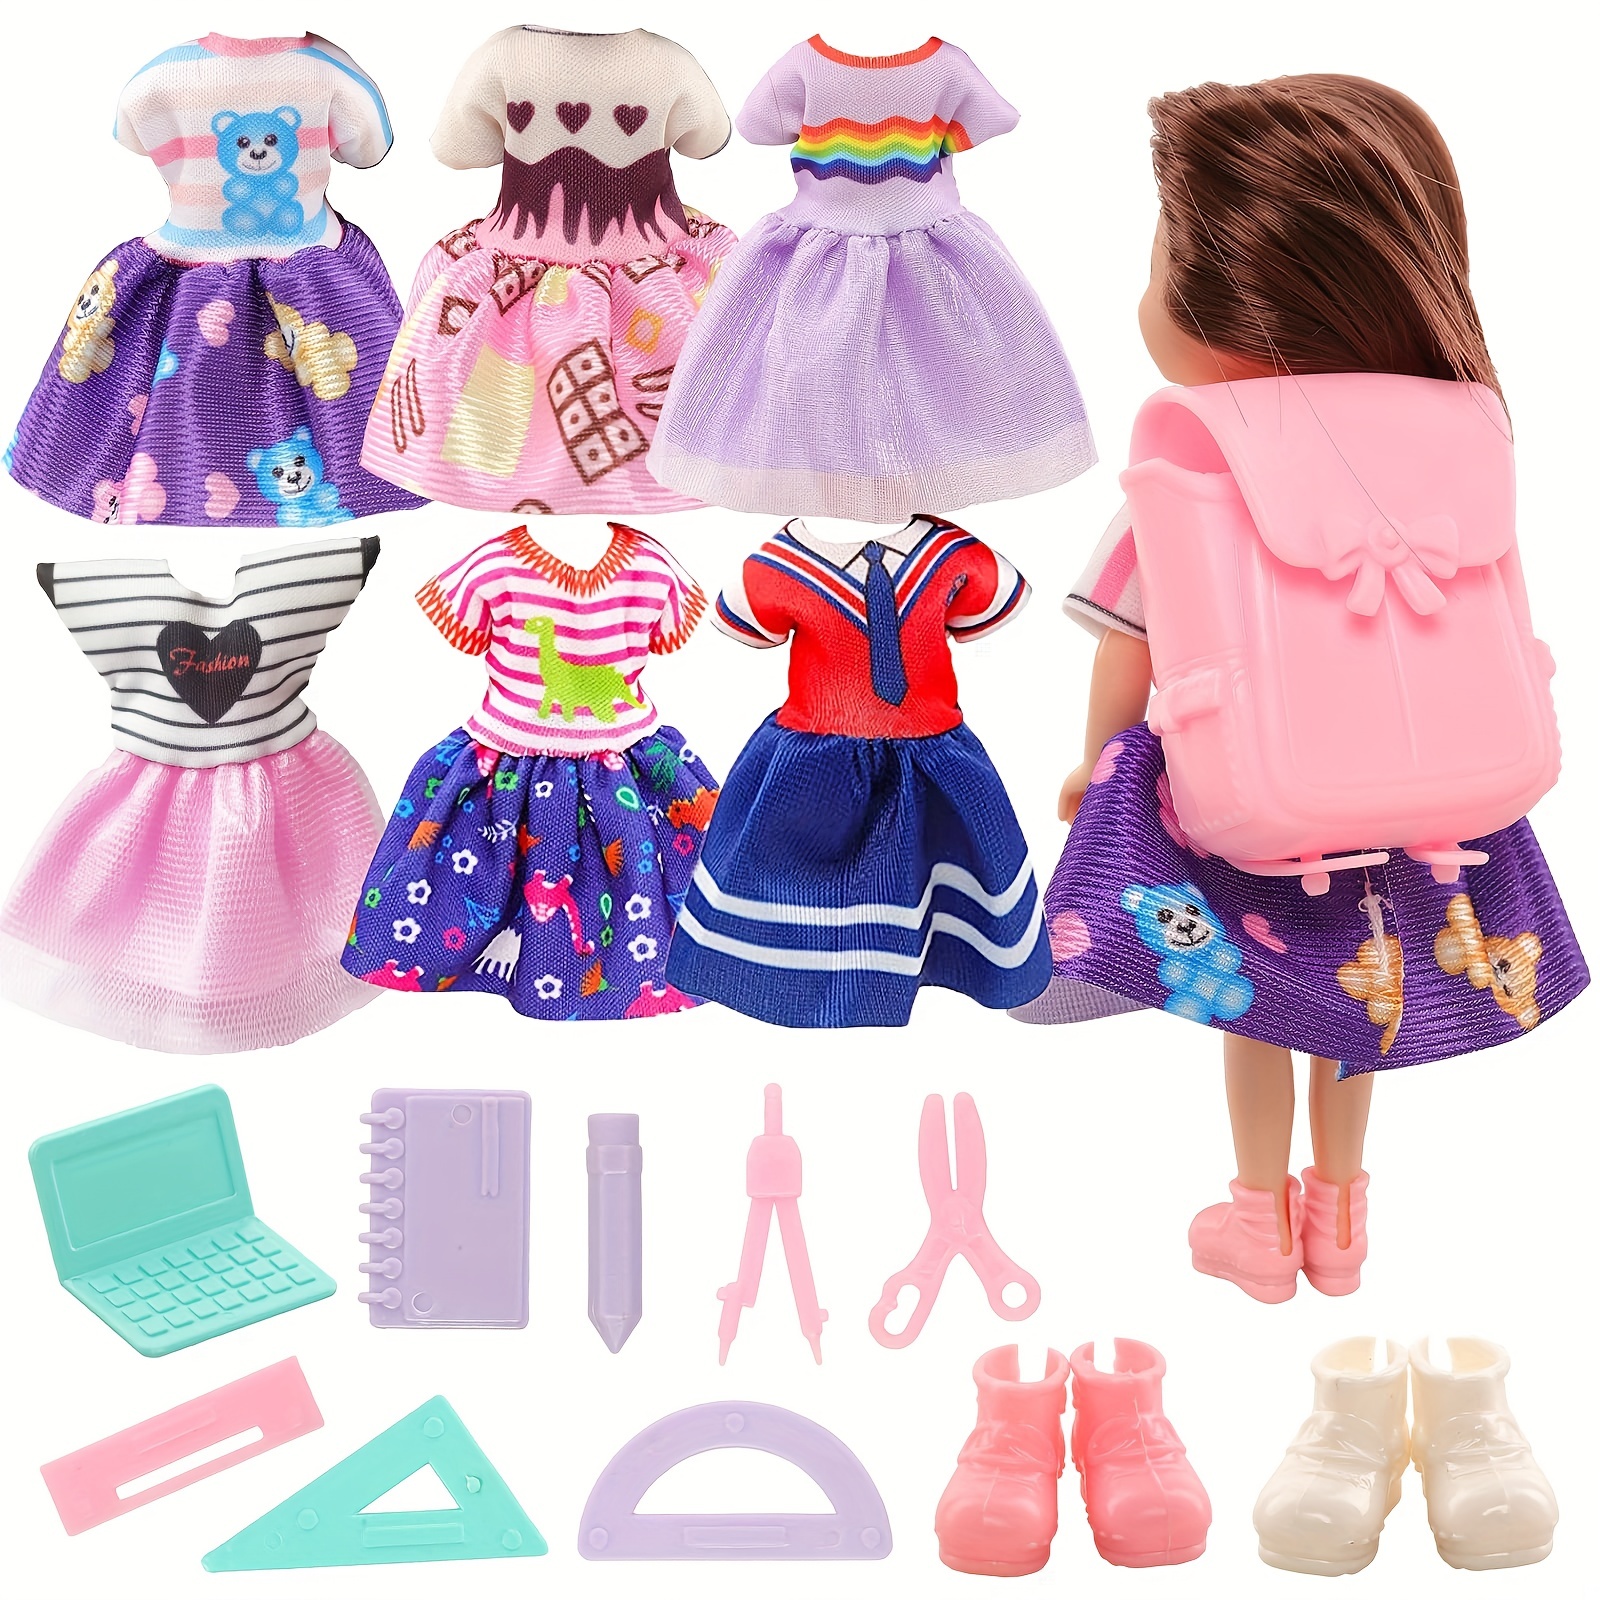 BARBIE CLOTHES PACK ASST - Mary Arnold Toys